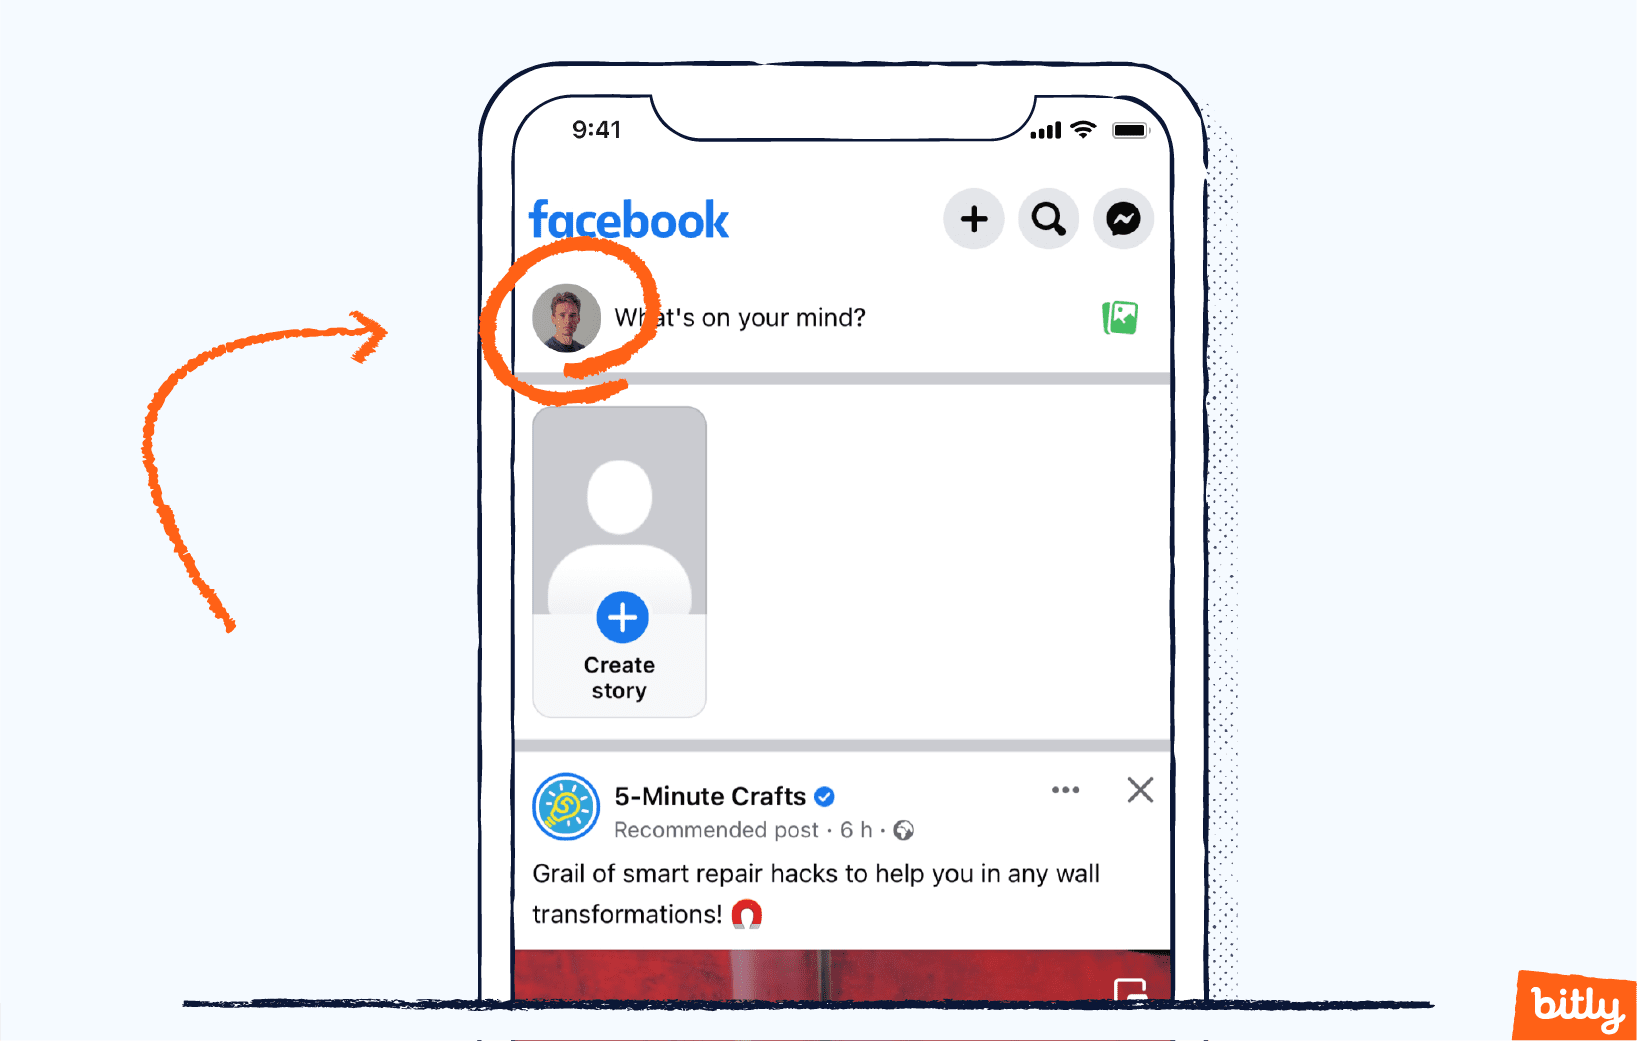 An orange arrow pointing at the profile icon of a Facebook user on a smartphone.